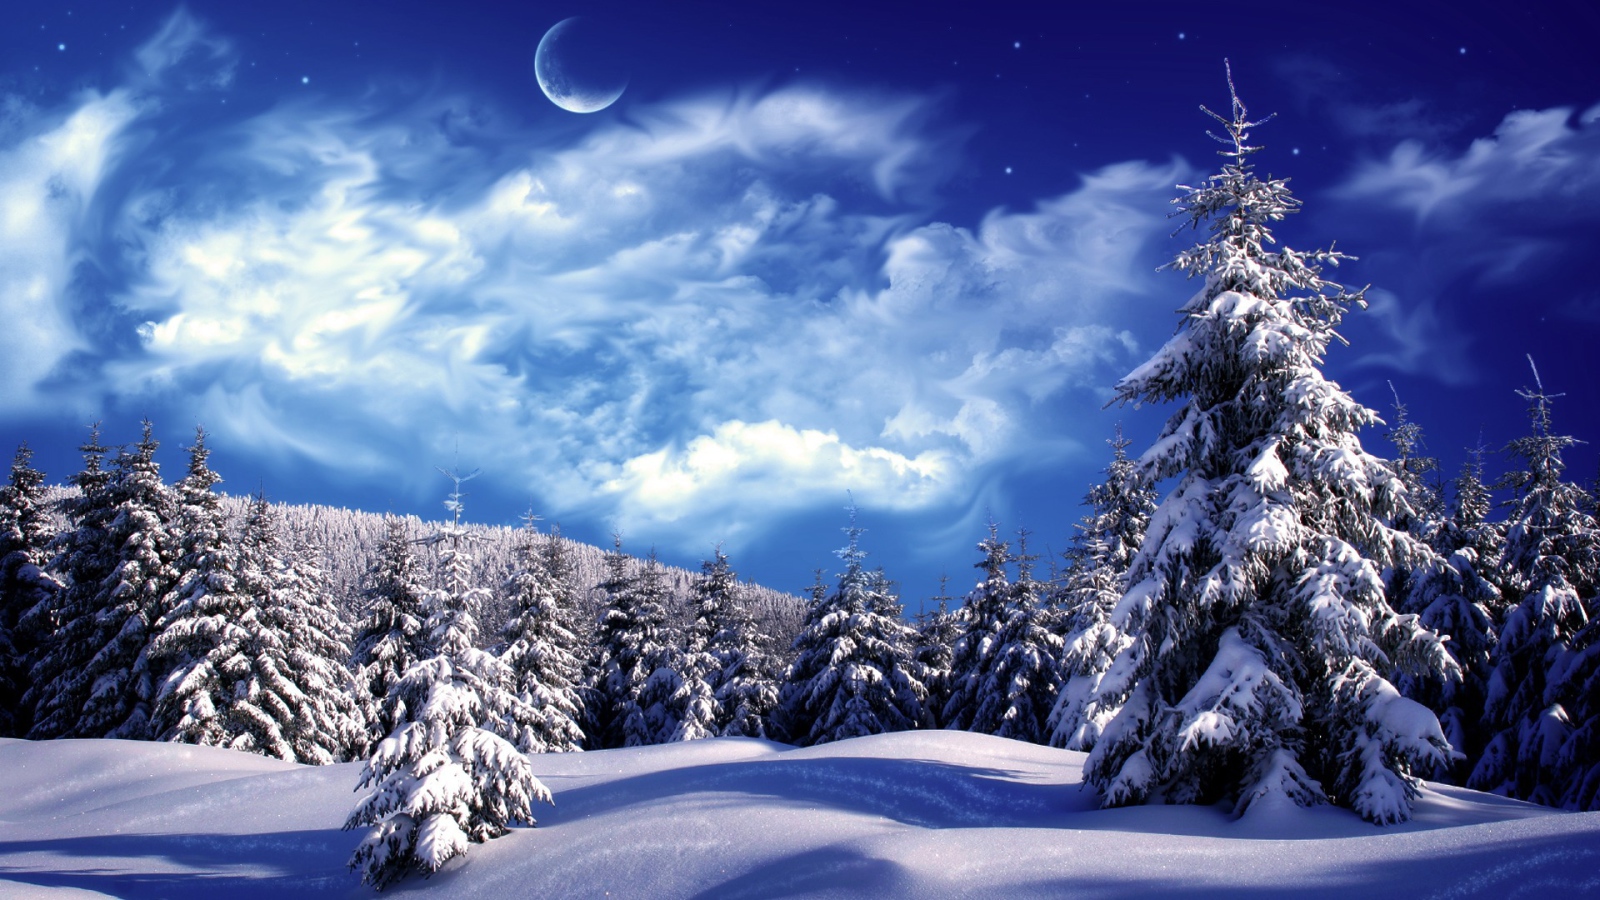 Winter forest in the moonlight